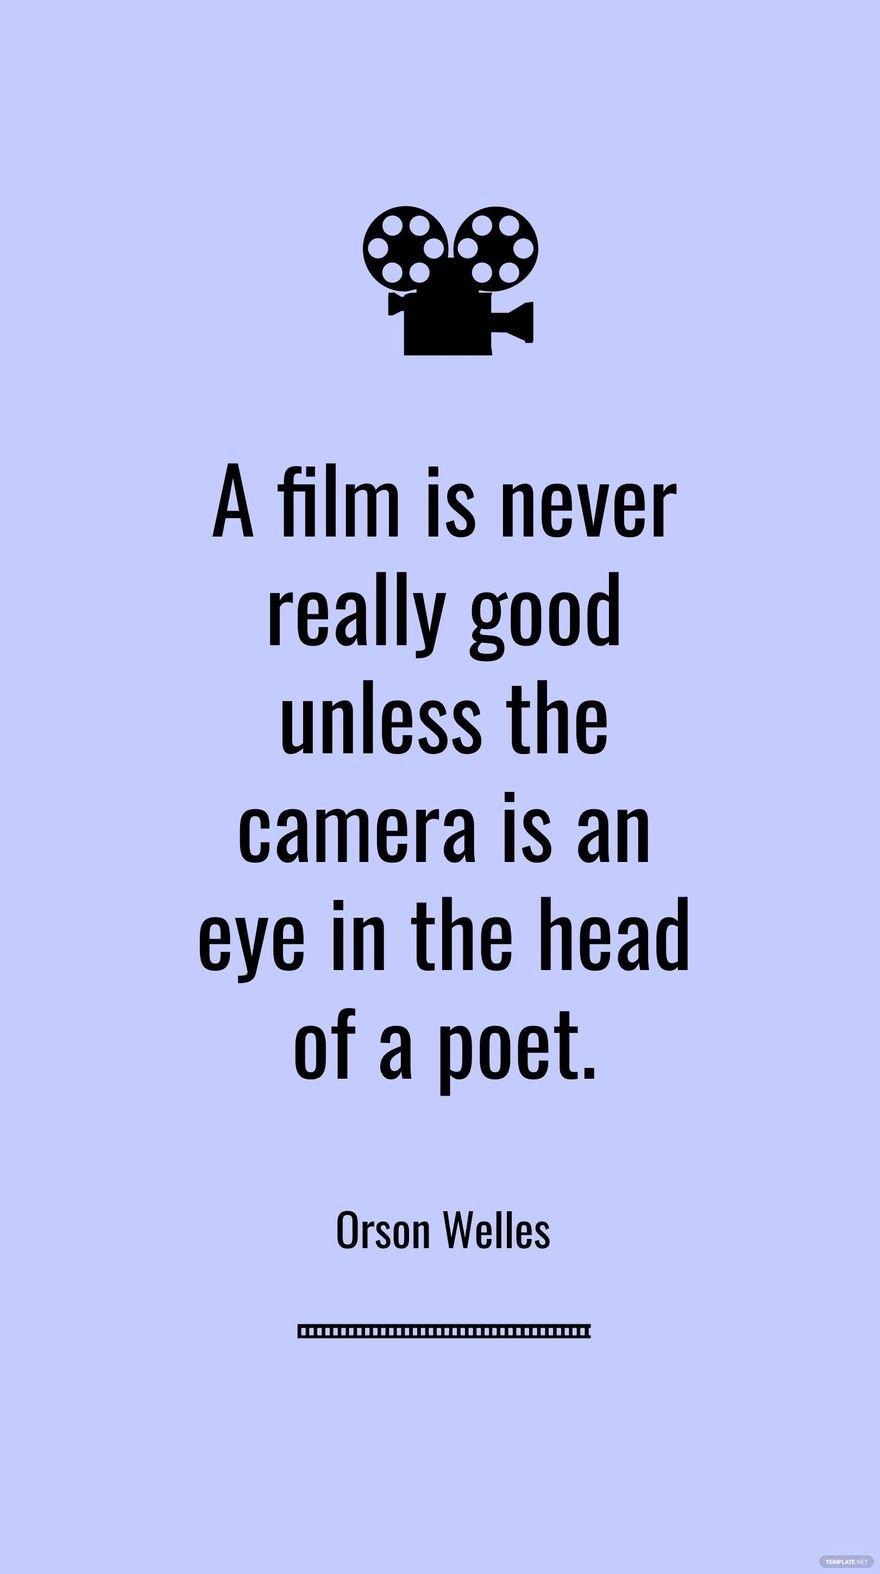 Free Orson Welles - A film is never really good unless the camera is an eye in the head of a poet. in JPG